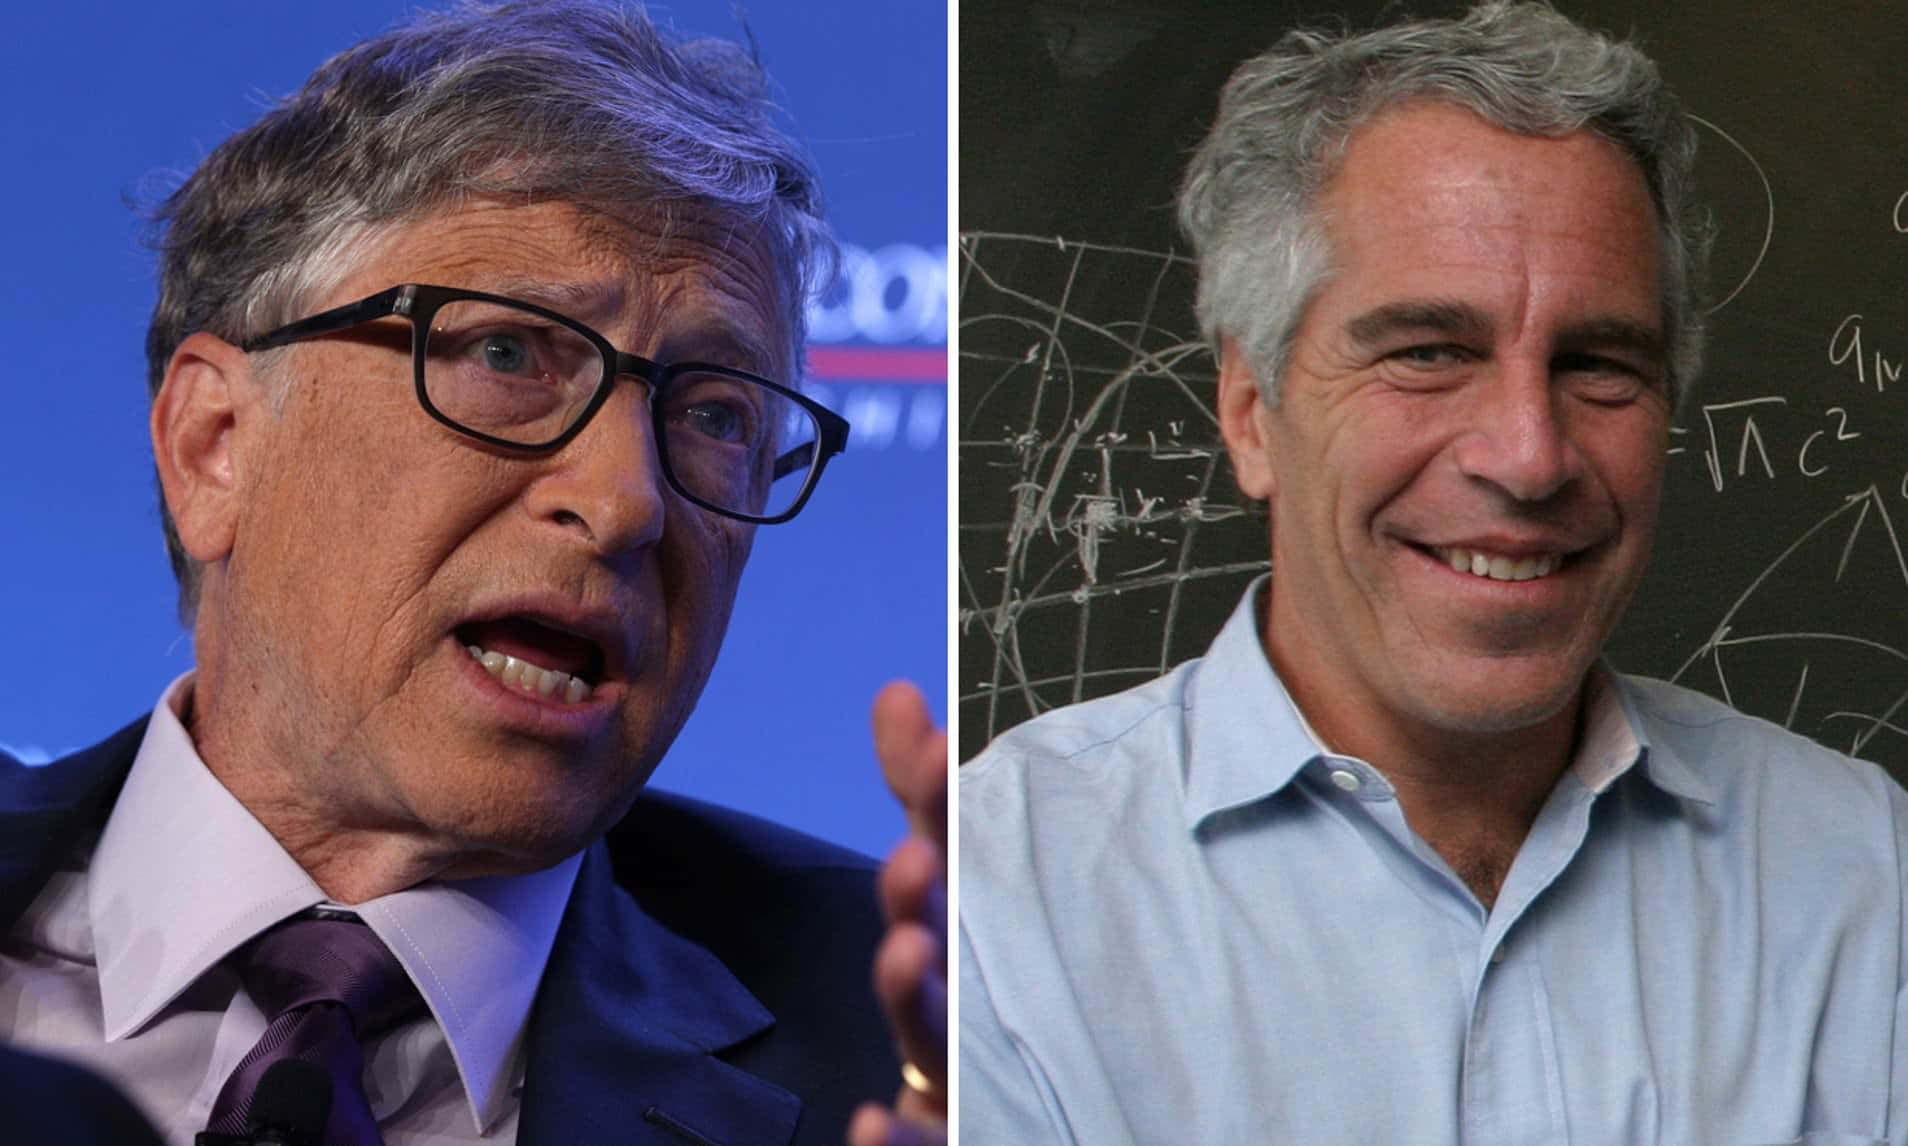 Billgates Och Jeffrey Epstein, Tidigare Bekanta. (note: It Is Unclear How This Translates To The Context Of Computer Or Mobile Wallpaper, As It Is A Sentence About Two Individuals And Their Relationship.)